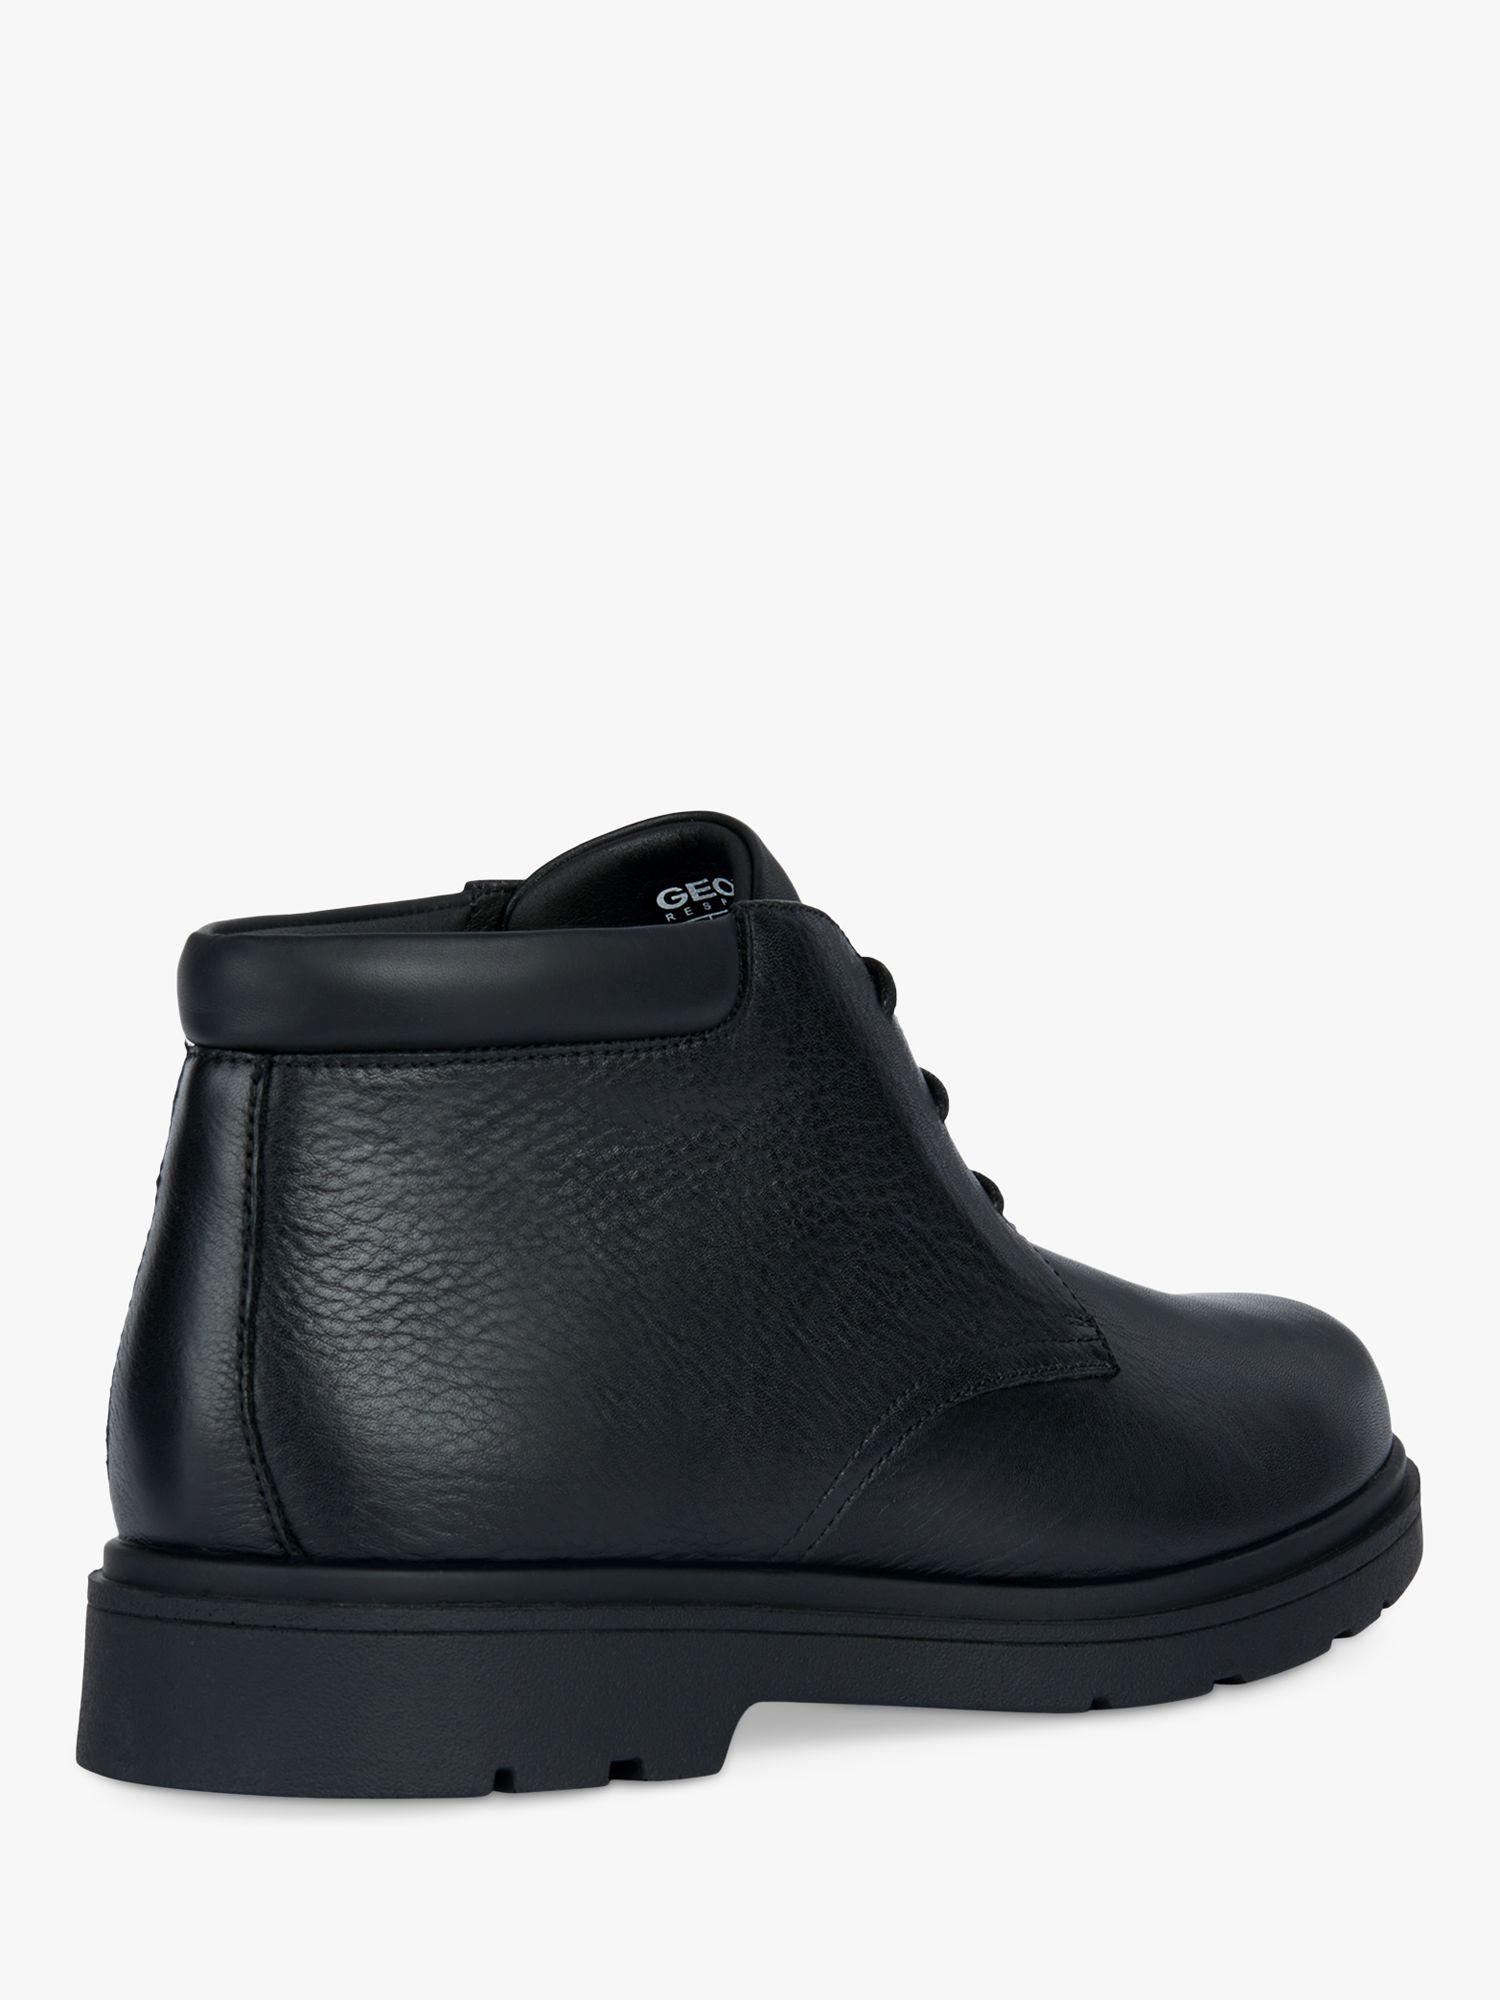 Geox Wide Fit Spherica EC1 Leather Ankle Boots, Black at John Lewis ...